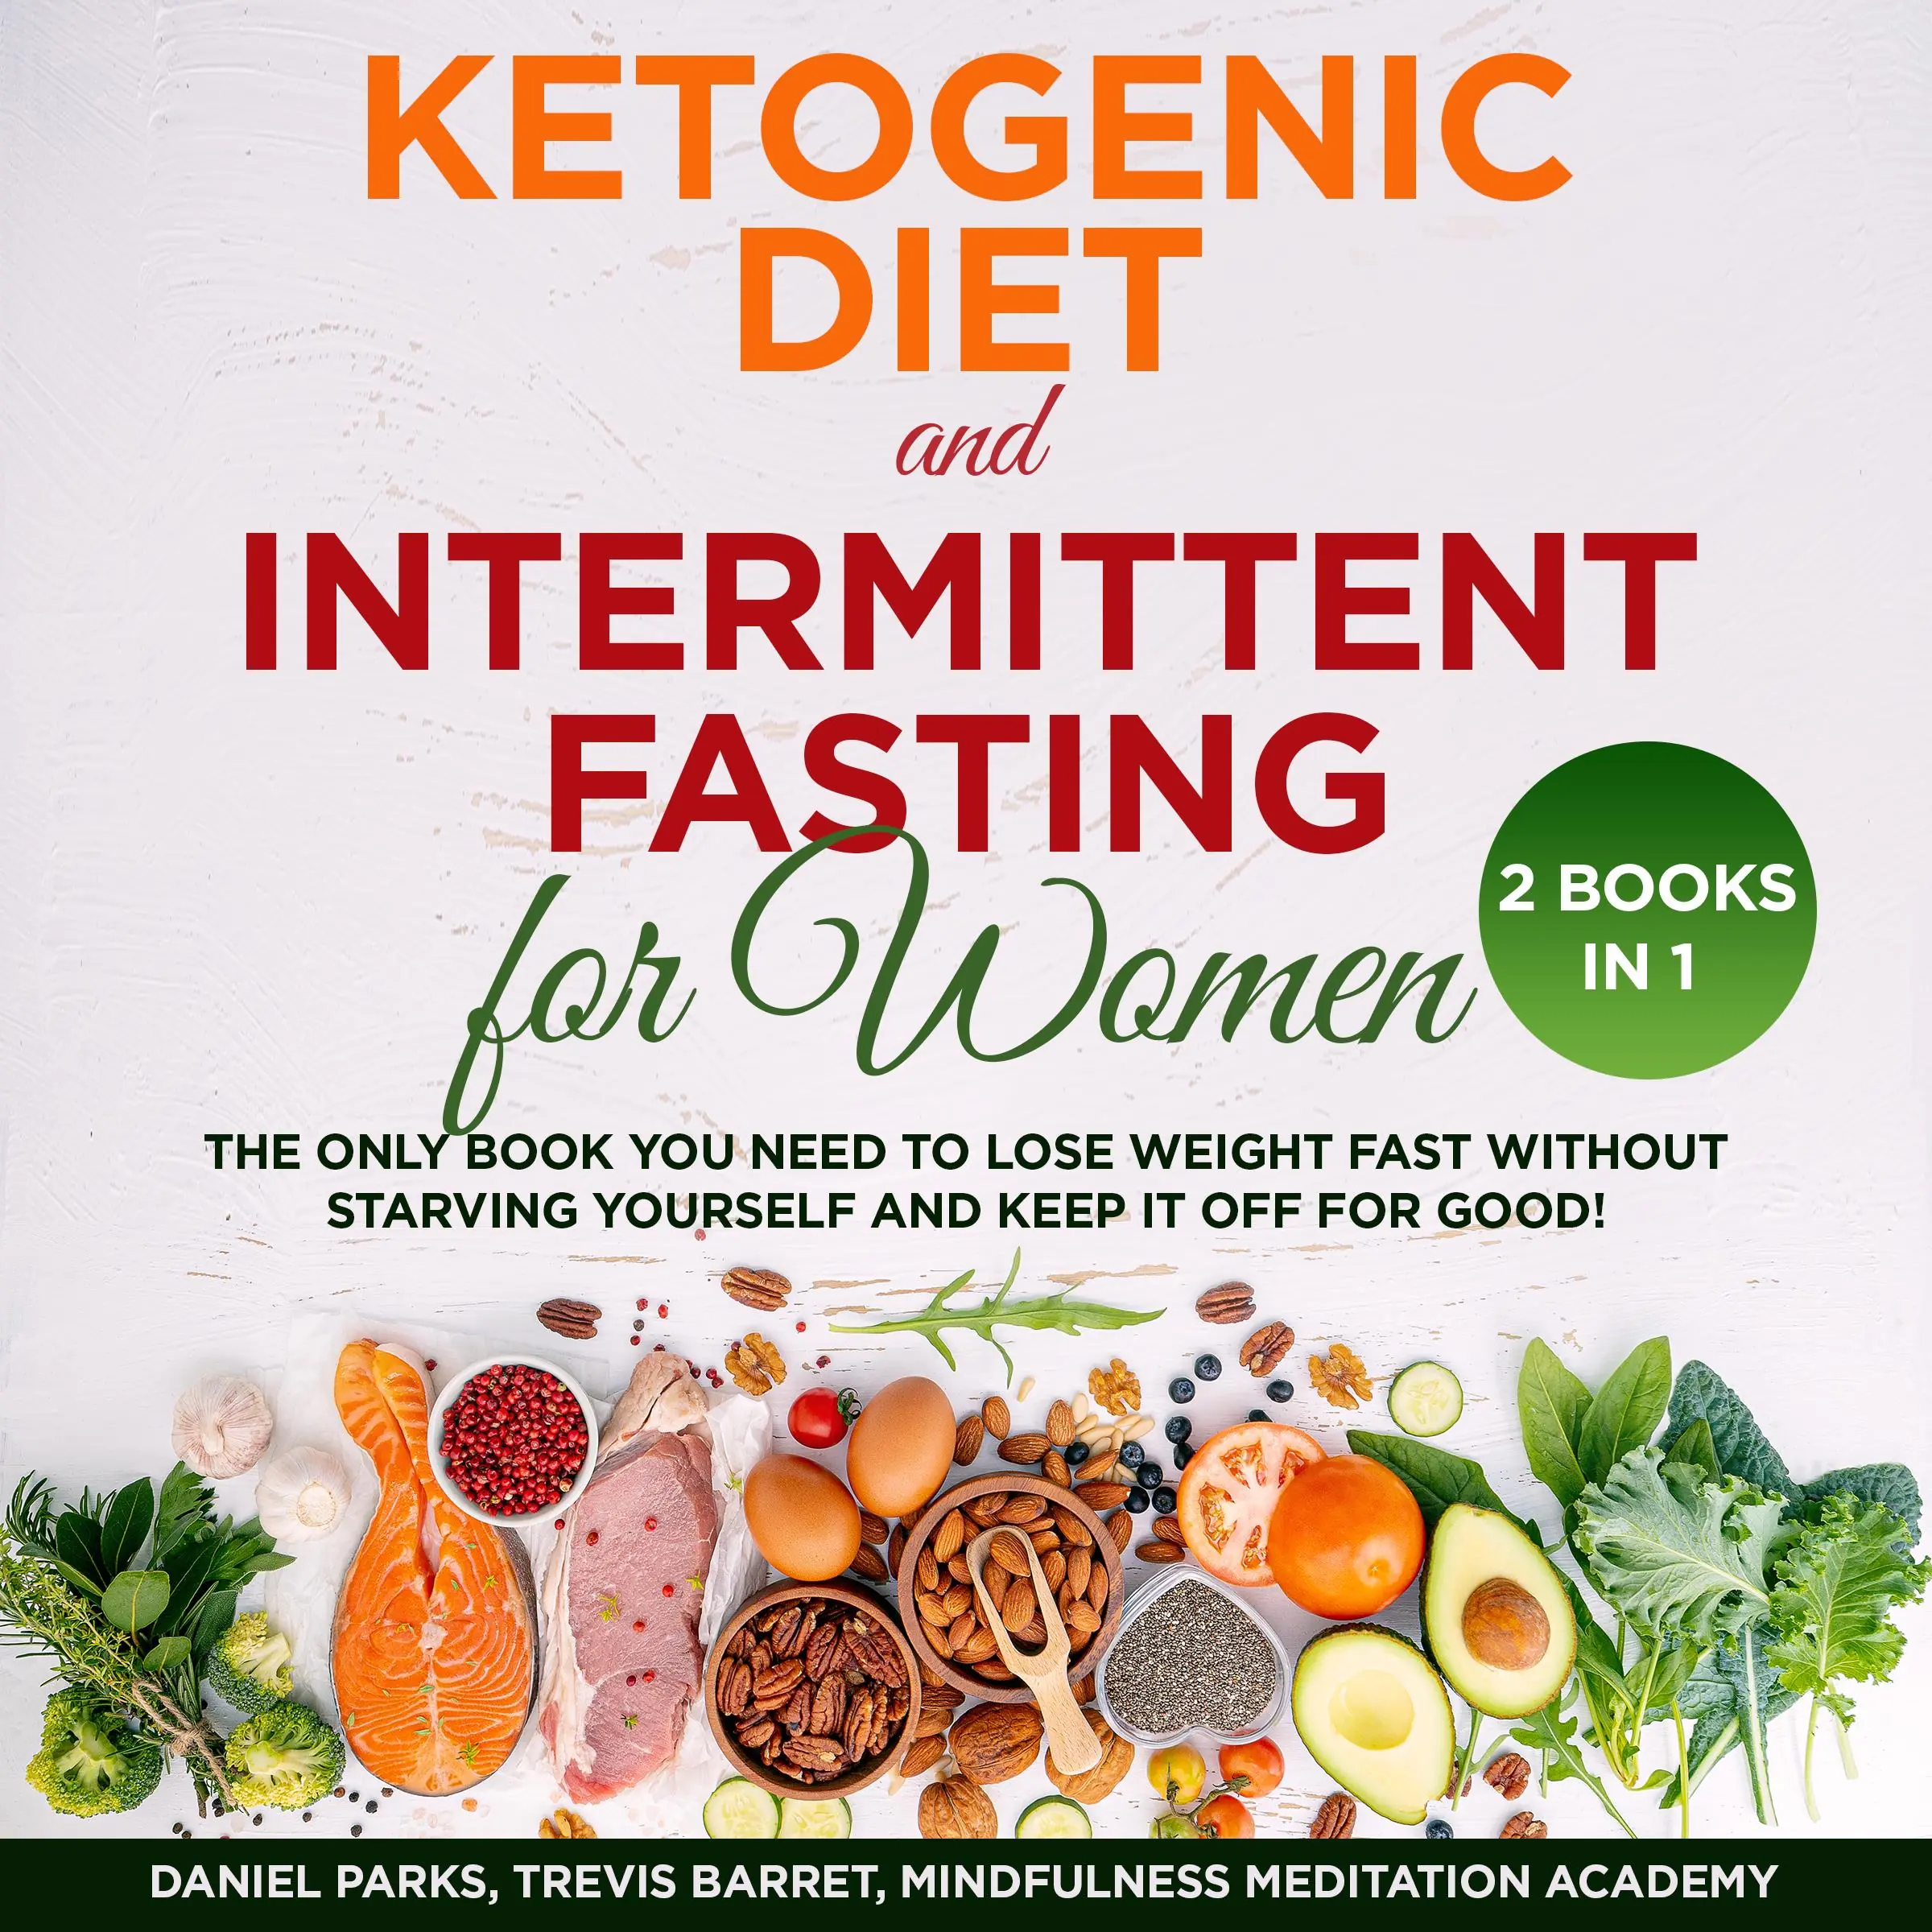 Ketogenic Diet and Intermittent Fasting for Women 2 Books in 1: The only Book you need to Lose Weight Fast without starving Yourself and keep it off for Good! Audiobook by Mindfulness Meditation Academy